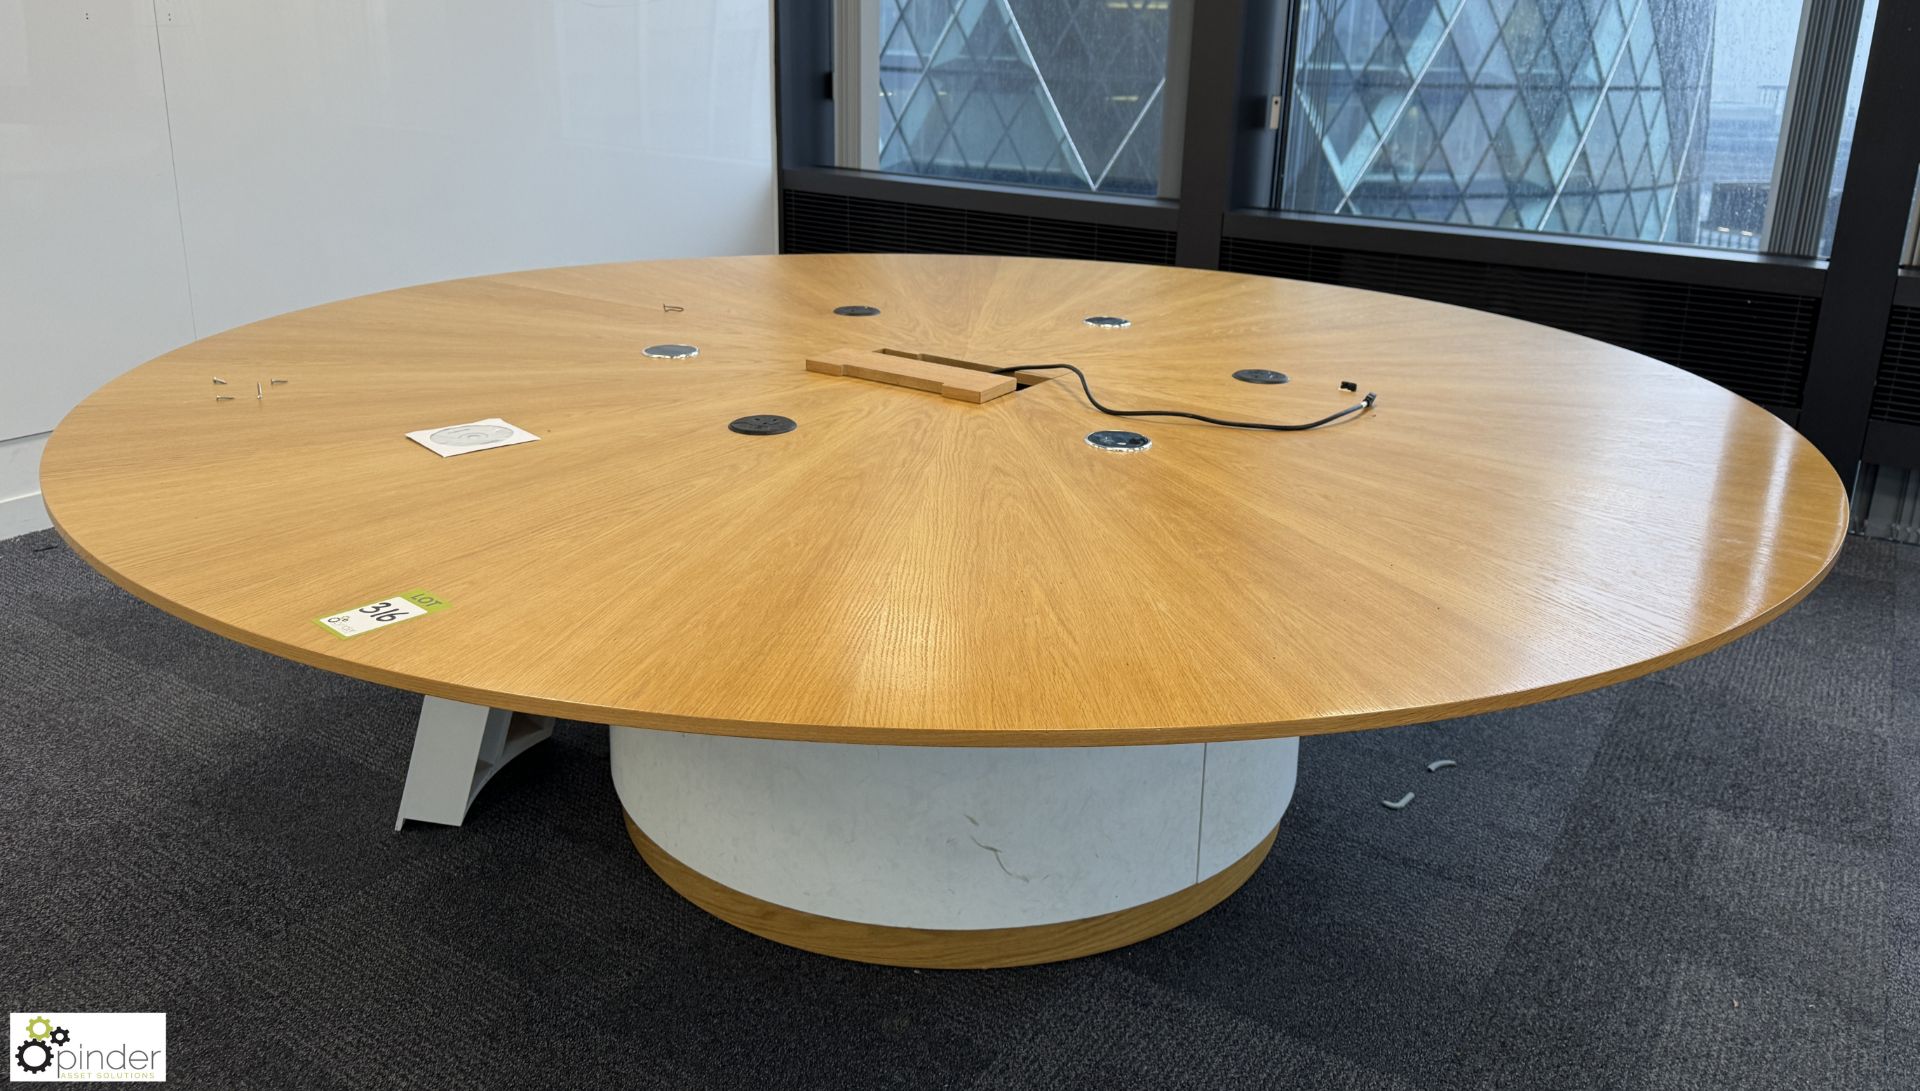 Light oak veneered circular Meeting Table, with cable management and centre base (location in - Image 4 of 6